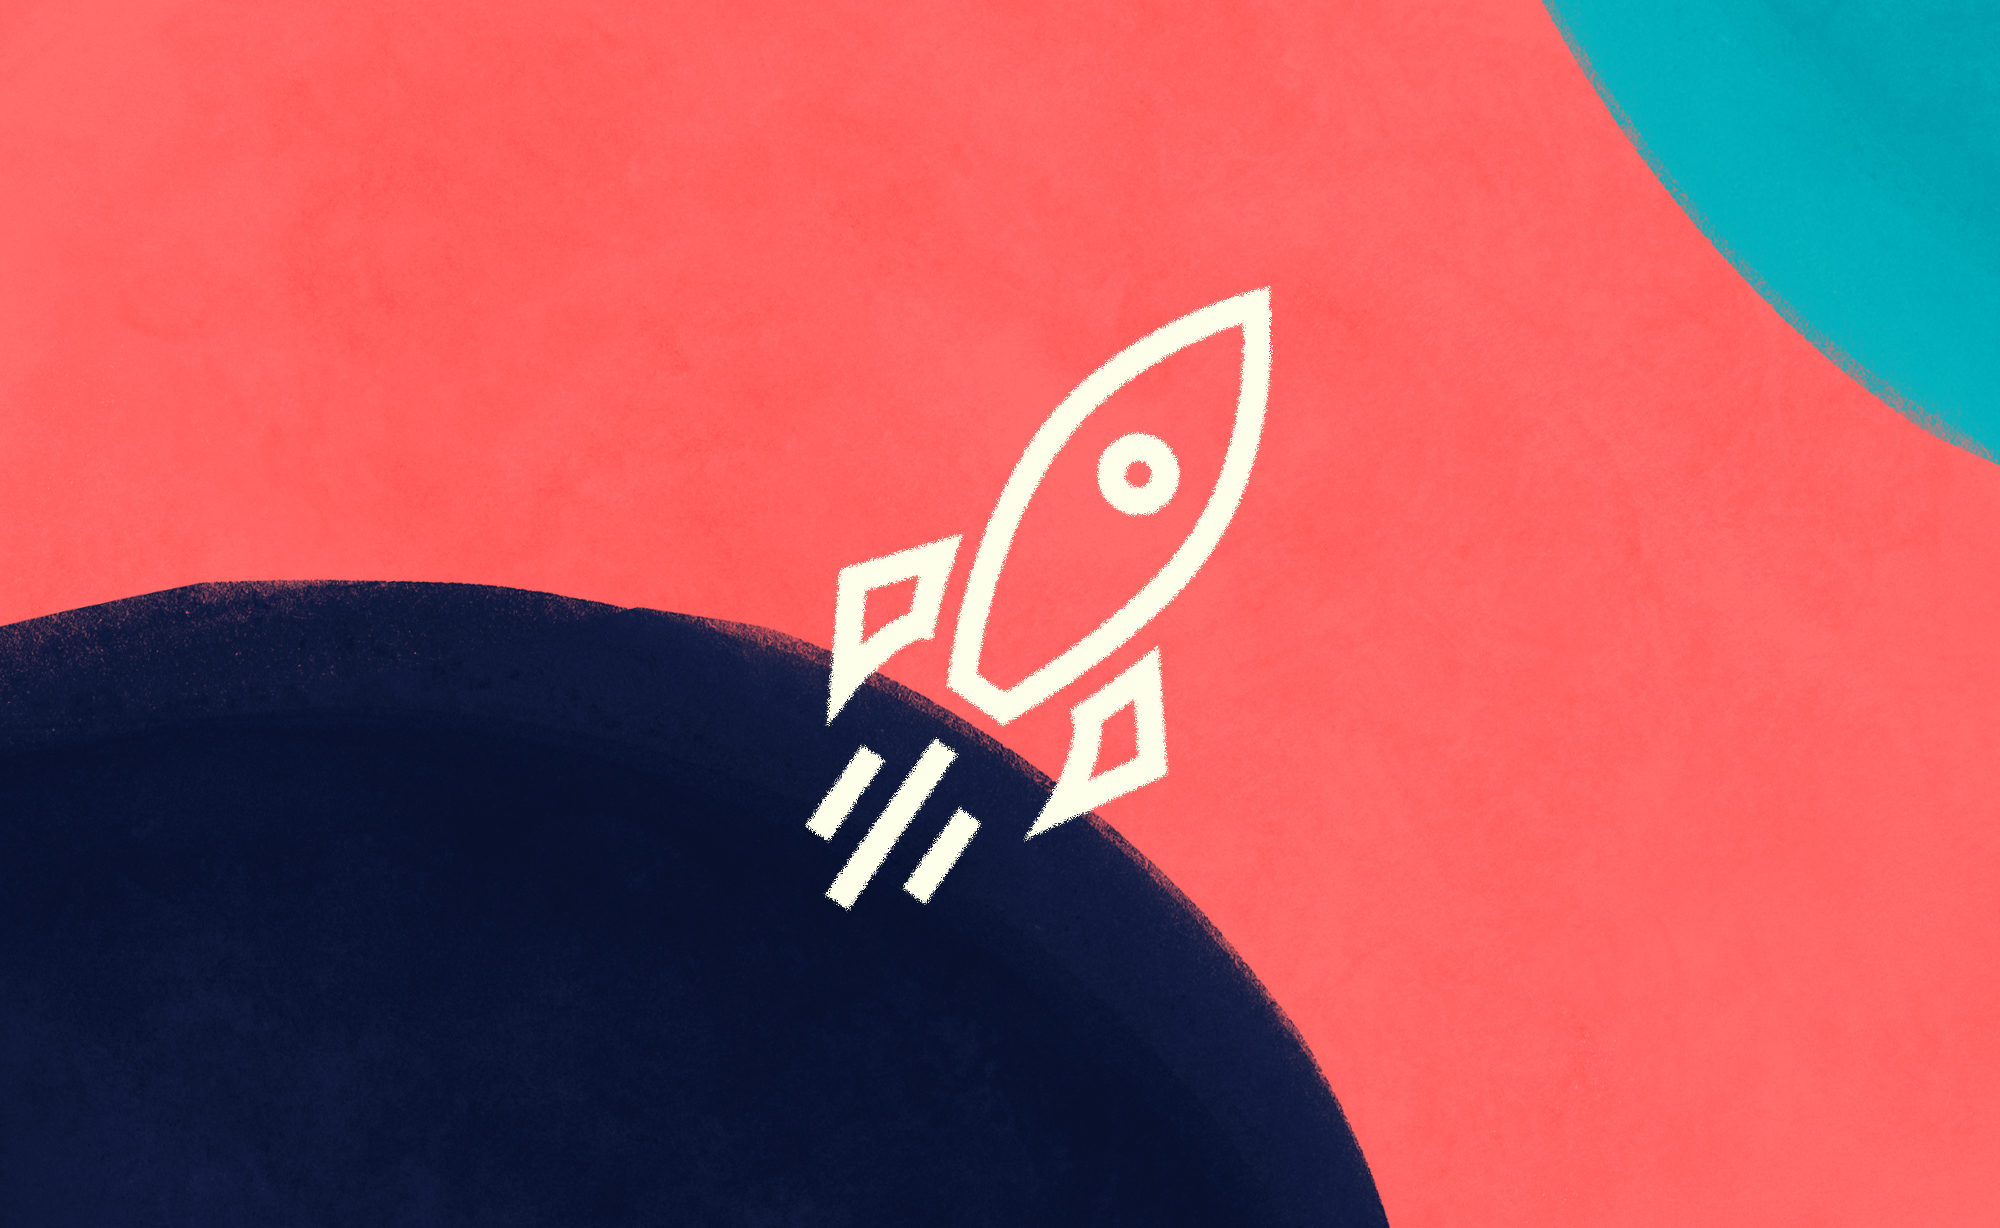 A launch rocket icon overlaid on a textured red, blue and turquoise backgrond